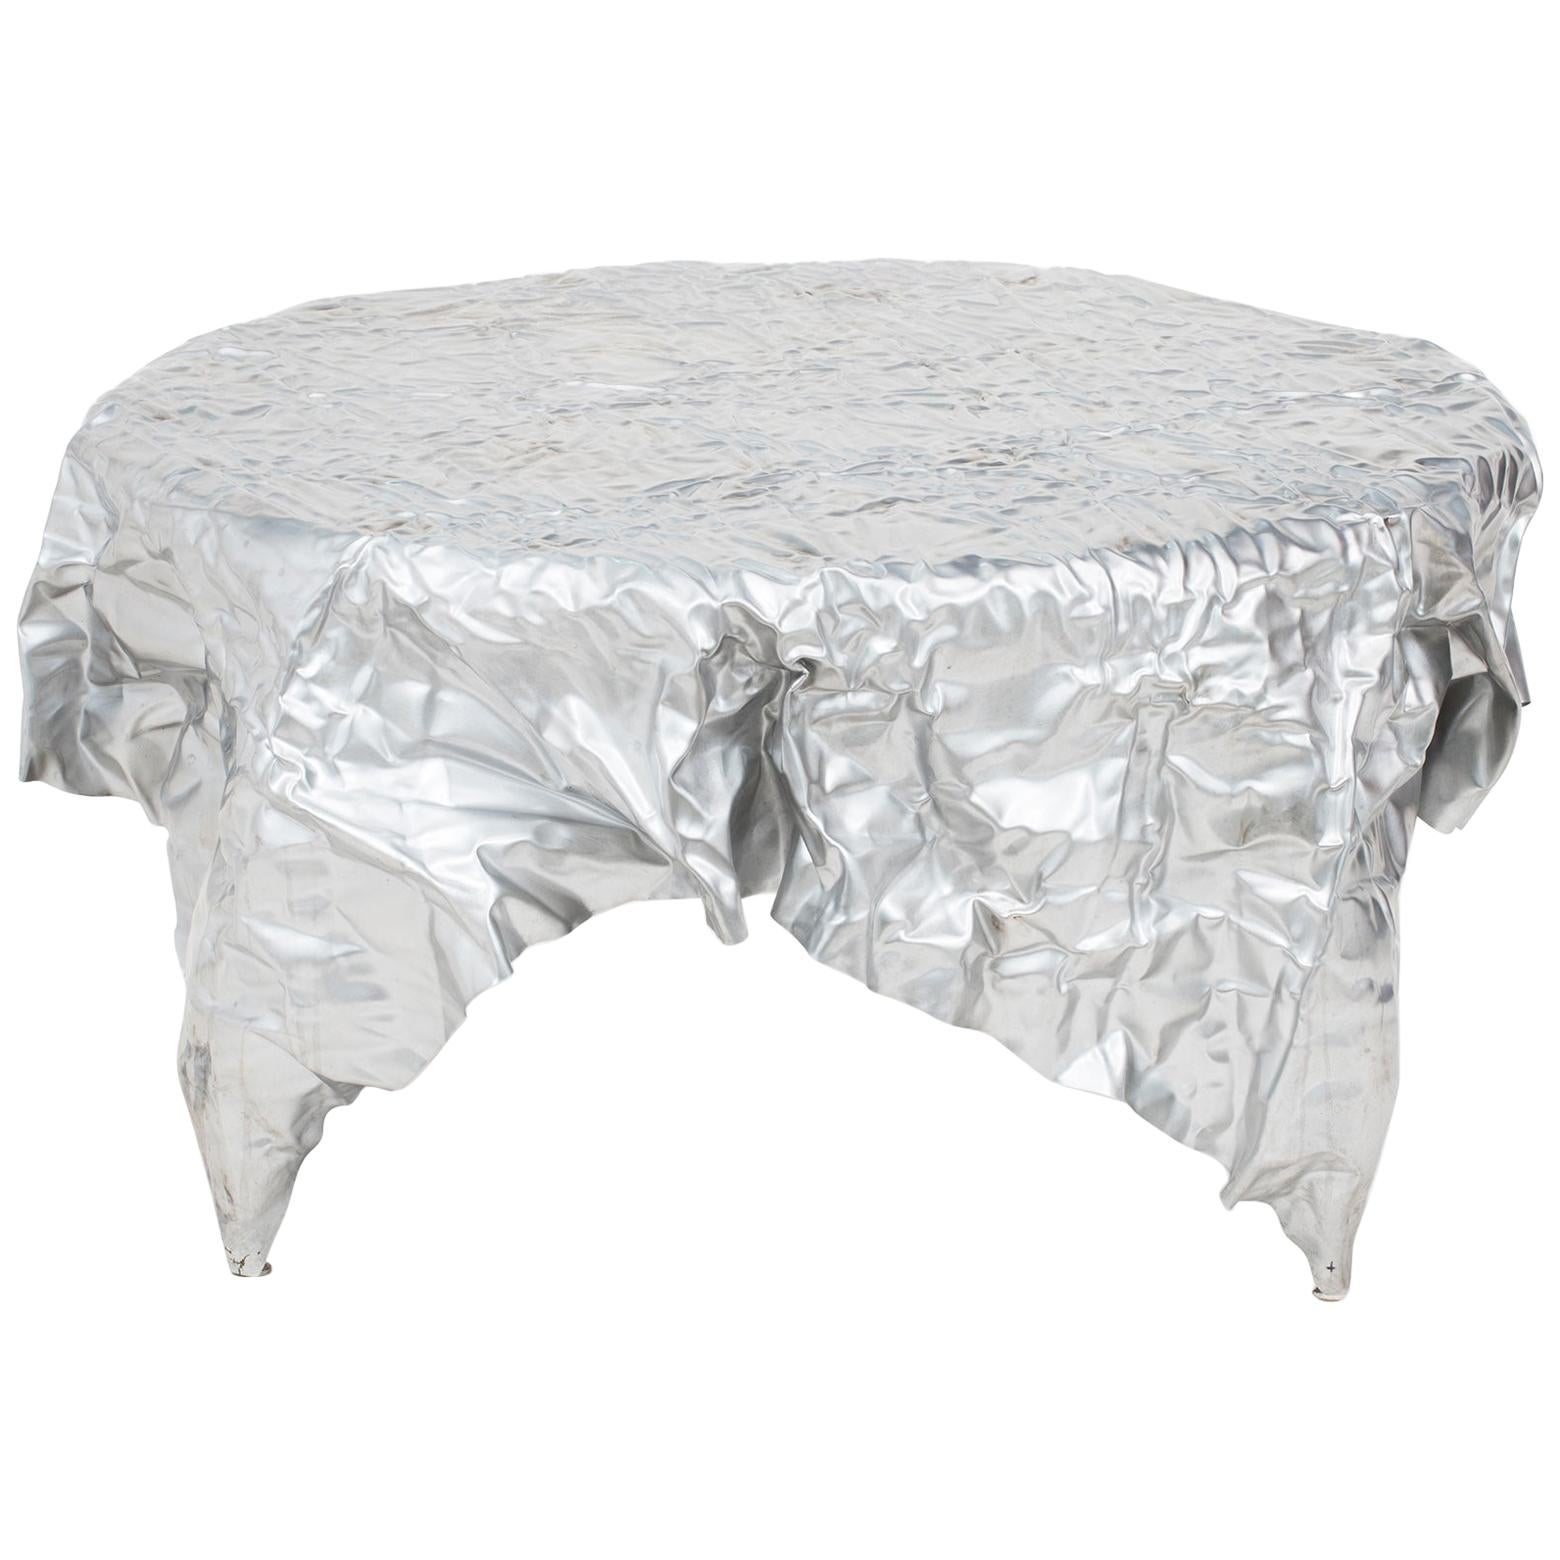 Christopher Prinz "Wrinkled Coffee Table" in Stainless Steel (Raw)